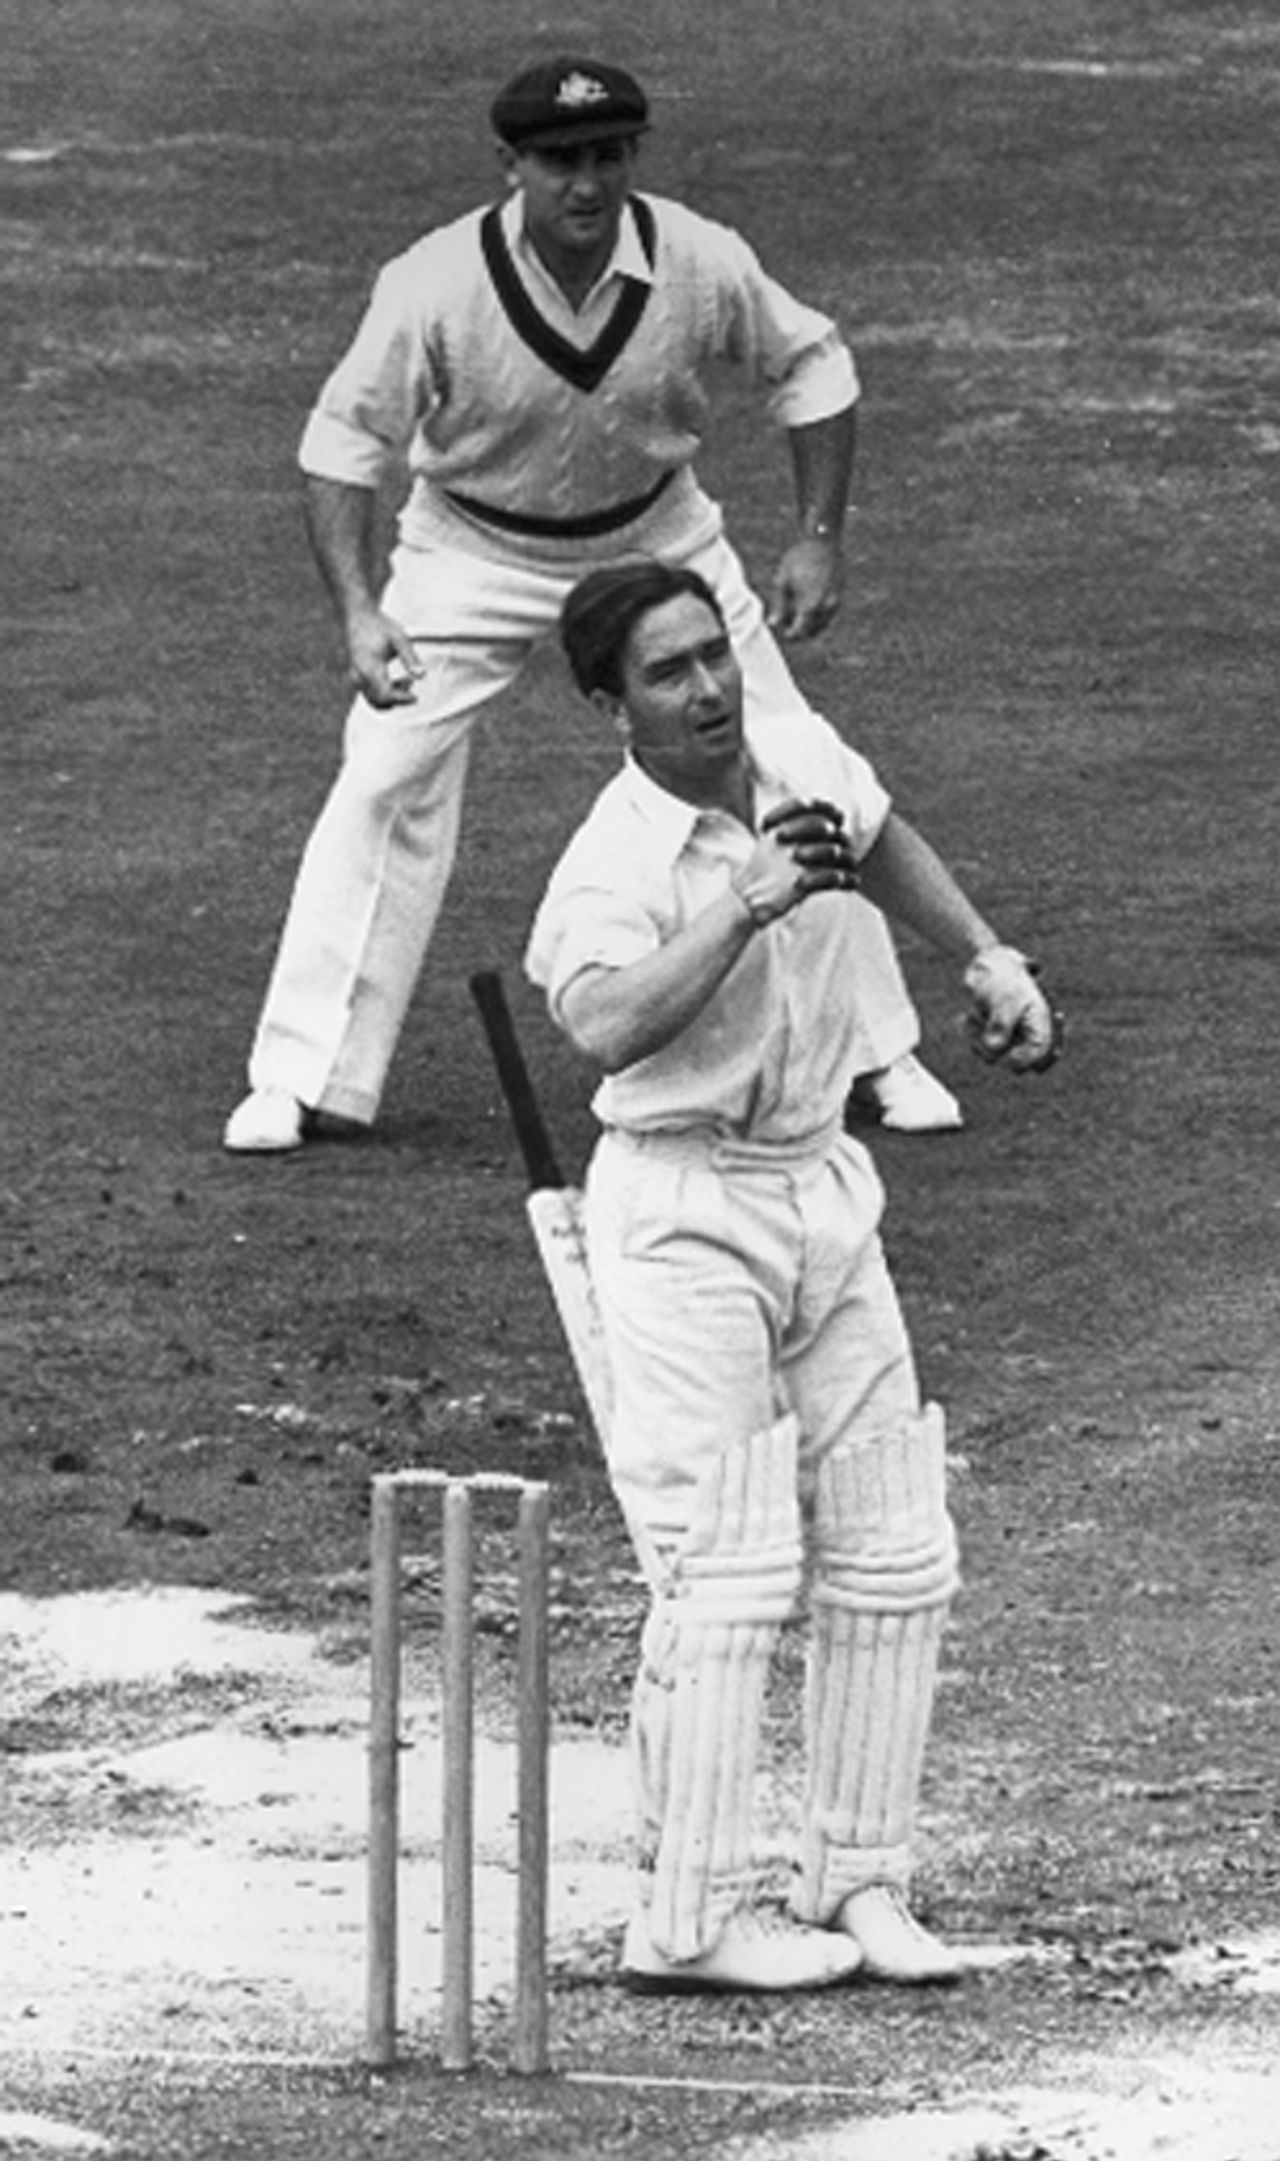 Denis Compton drops his bat after being struck by Ray Lindwall, England v Australia, 5th Test, The Oval, August 14, 1948